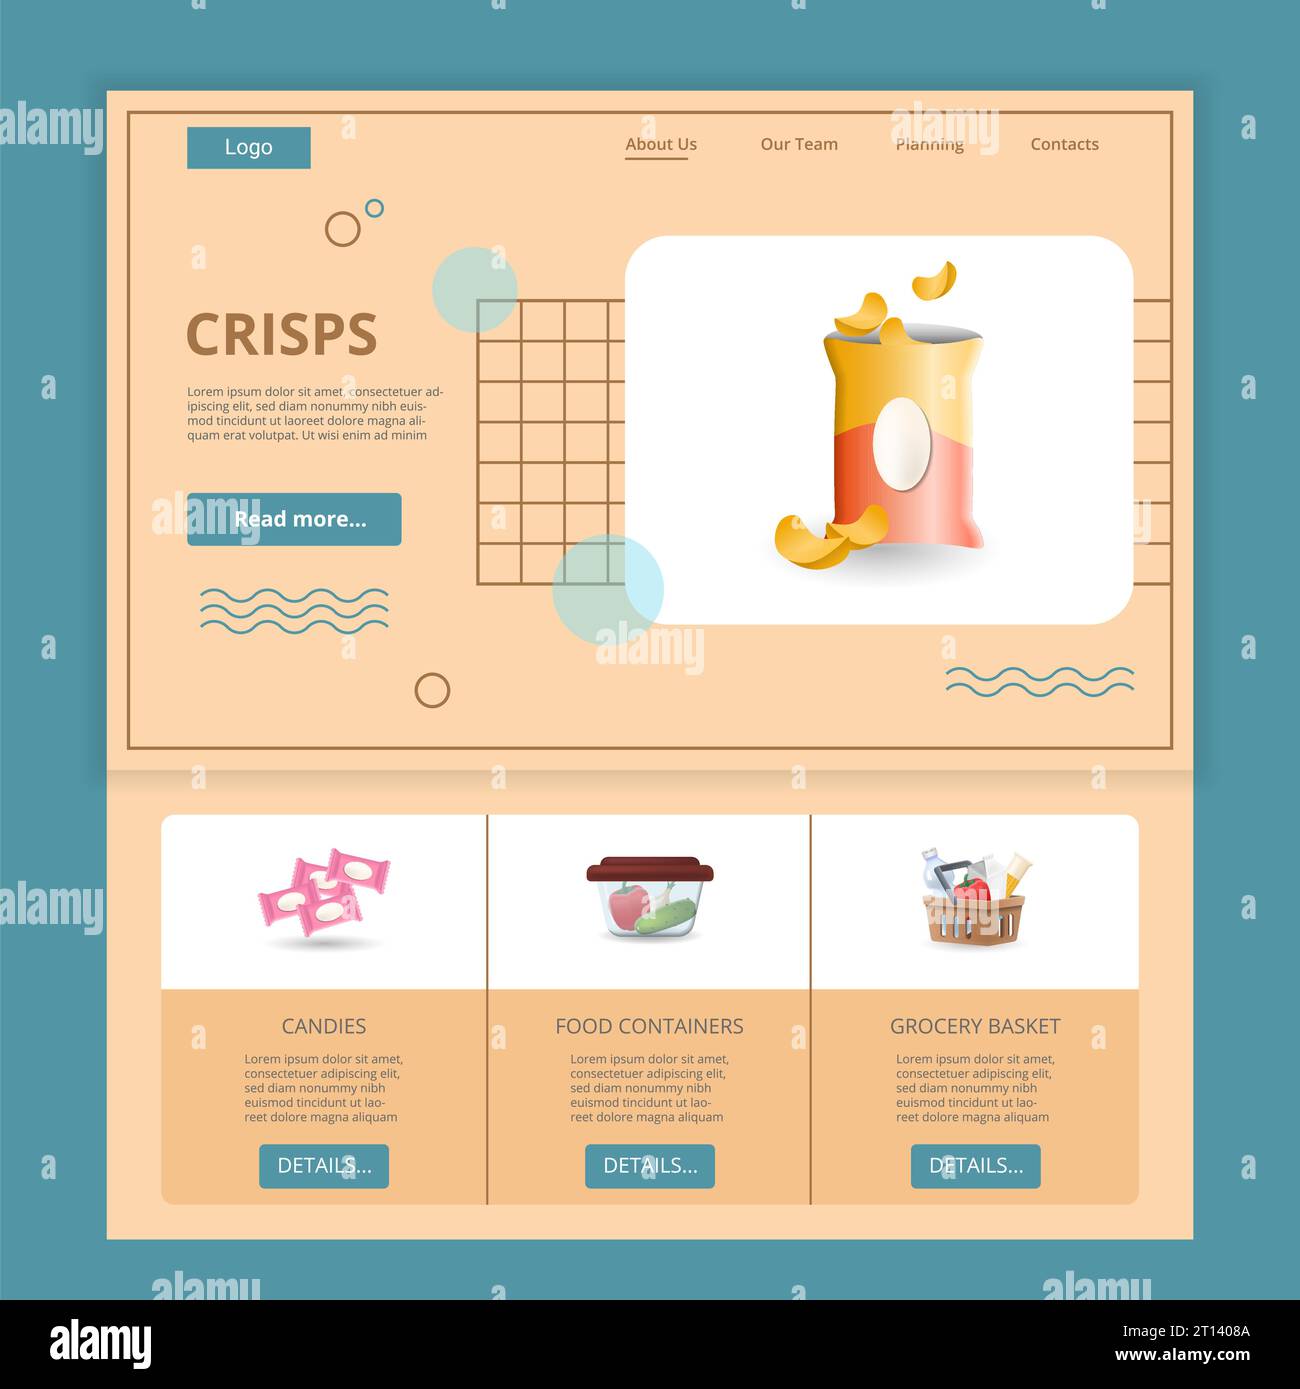 Crisps flat landing page website template. Candies, food containers, grocery basket. Web banner with header, content and footer. Vector illustration. Stock Vector